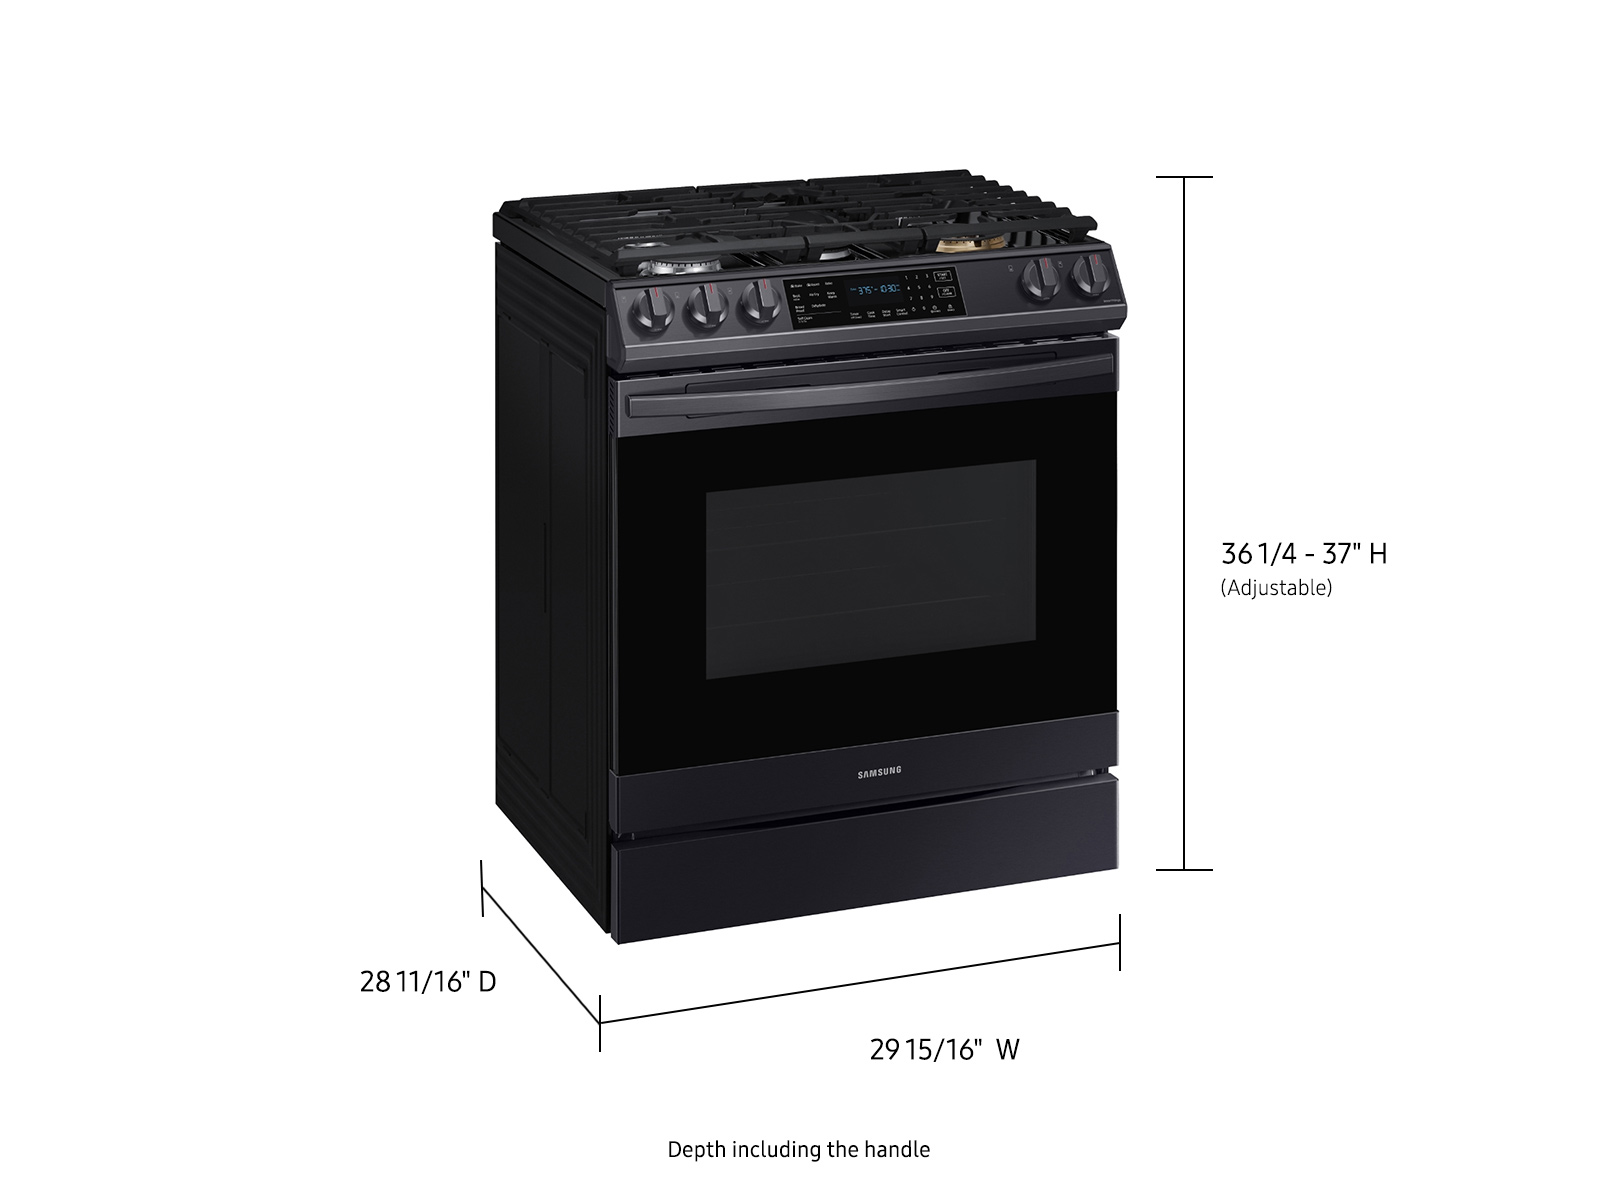 Samsung 6.0 Cu. ft. Slide-in GAS Range with Air Fry, Stainless Steel - NX60T8511SS